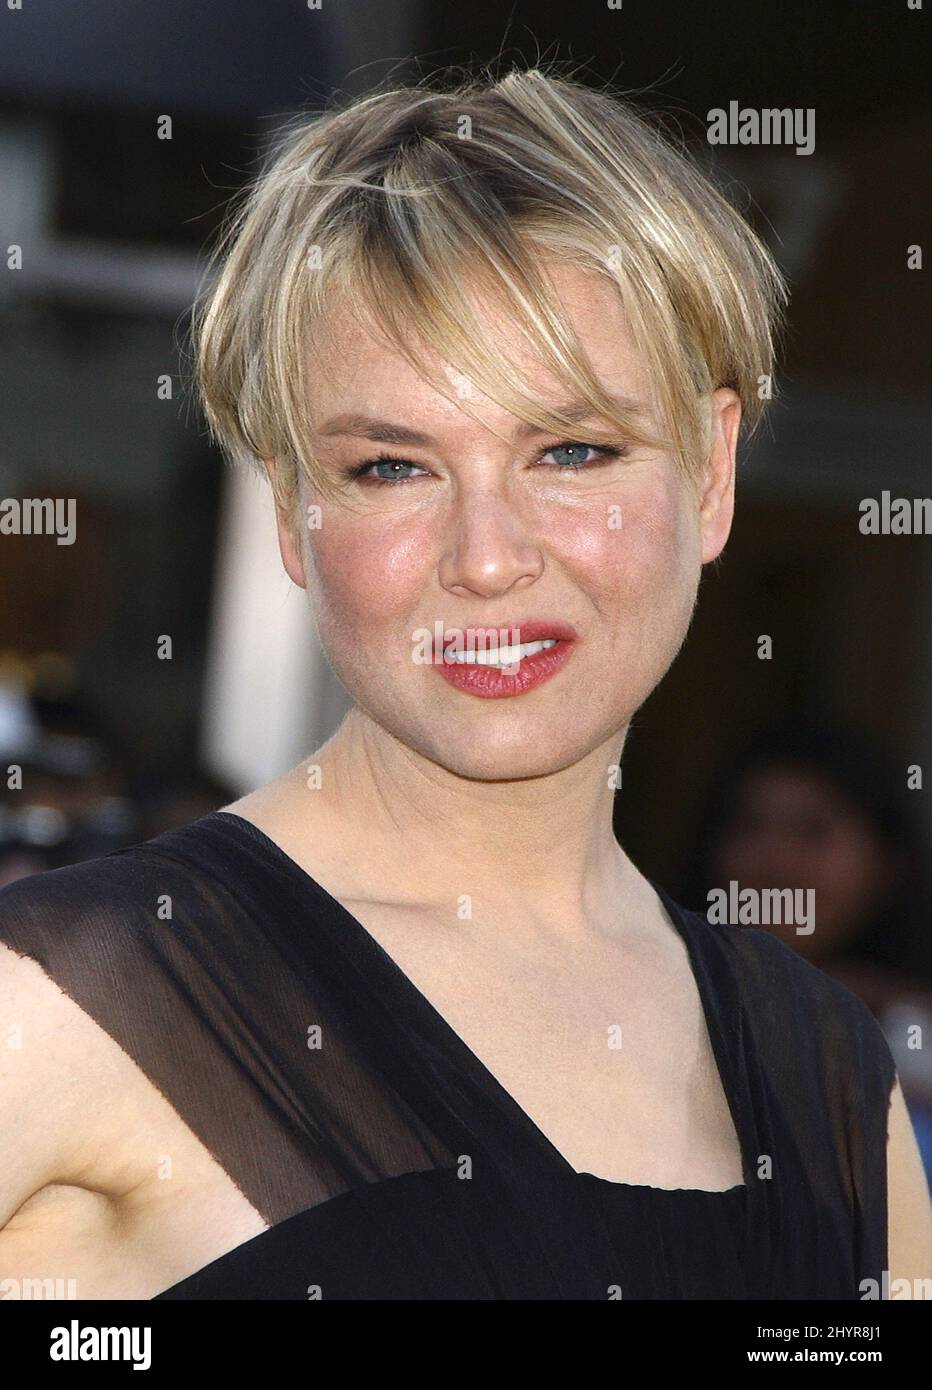 Renee Zellweger at the Los Angeles premiere of 'Bee Movie' at the Mann Village Theatre, Westwood, Los Angeles. Stock Photo